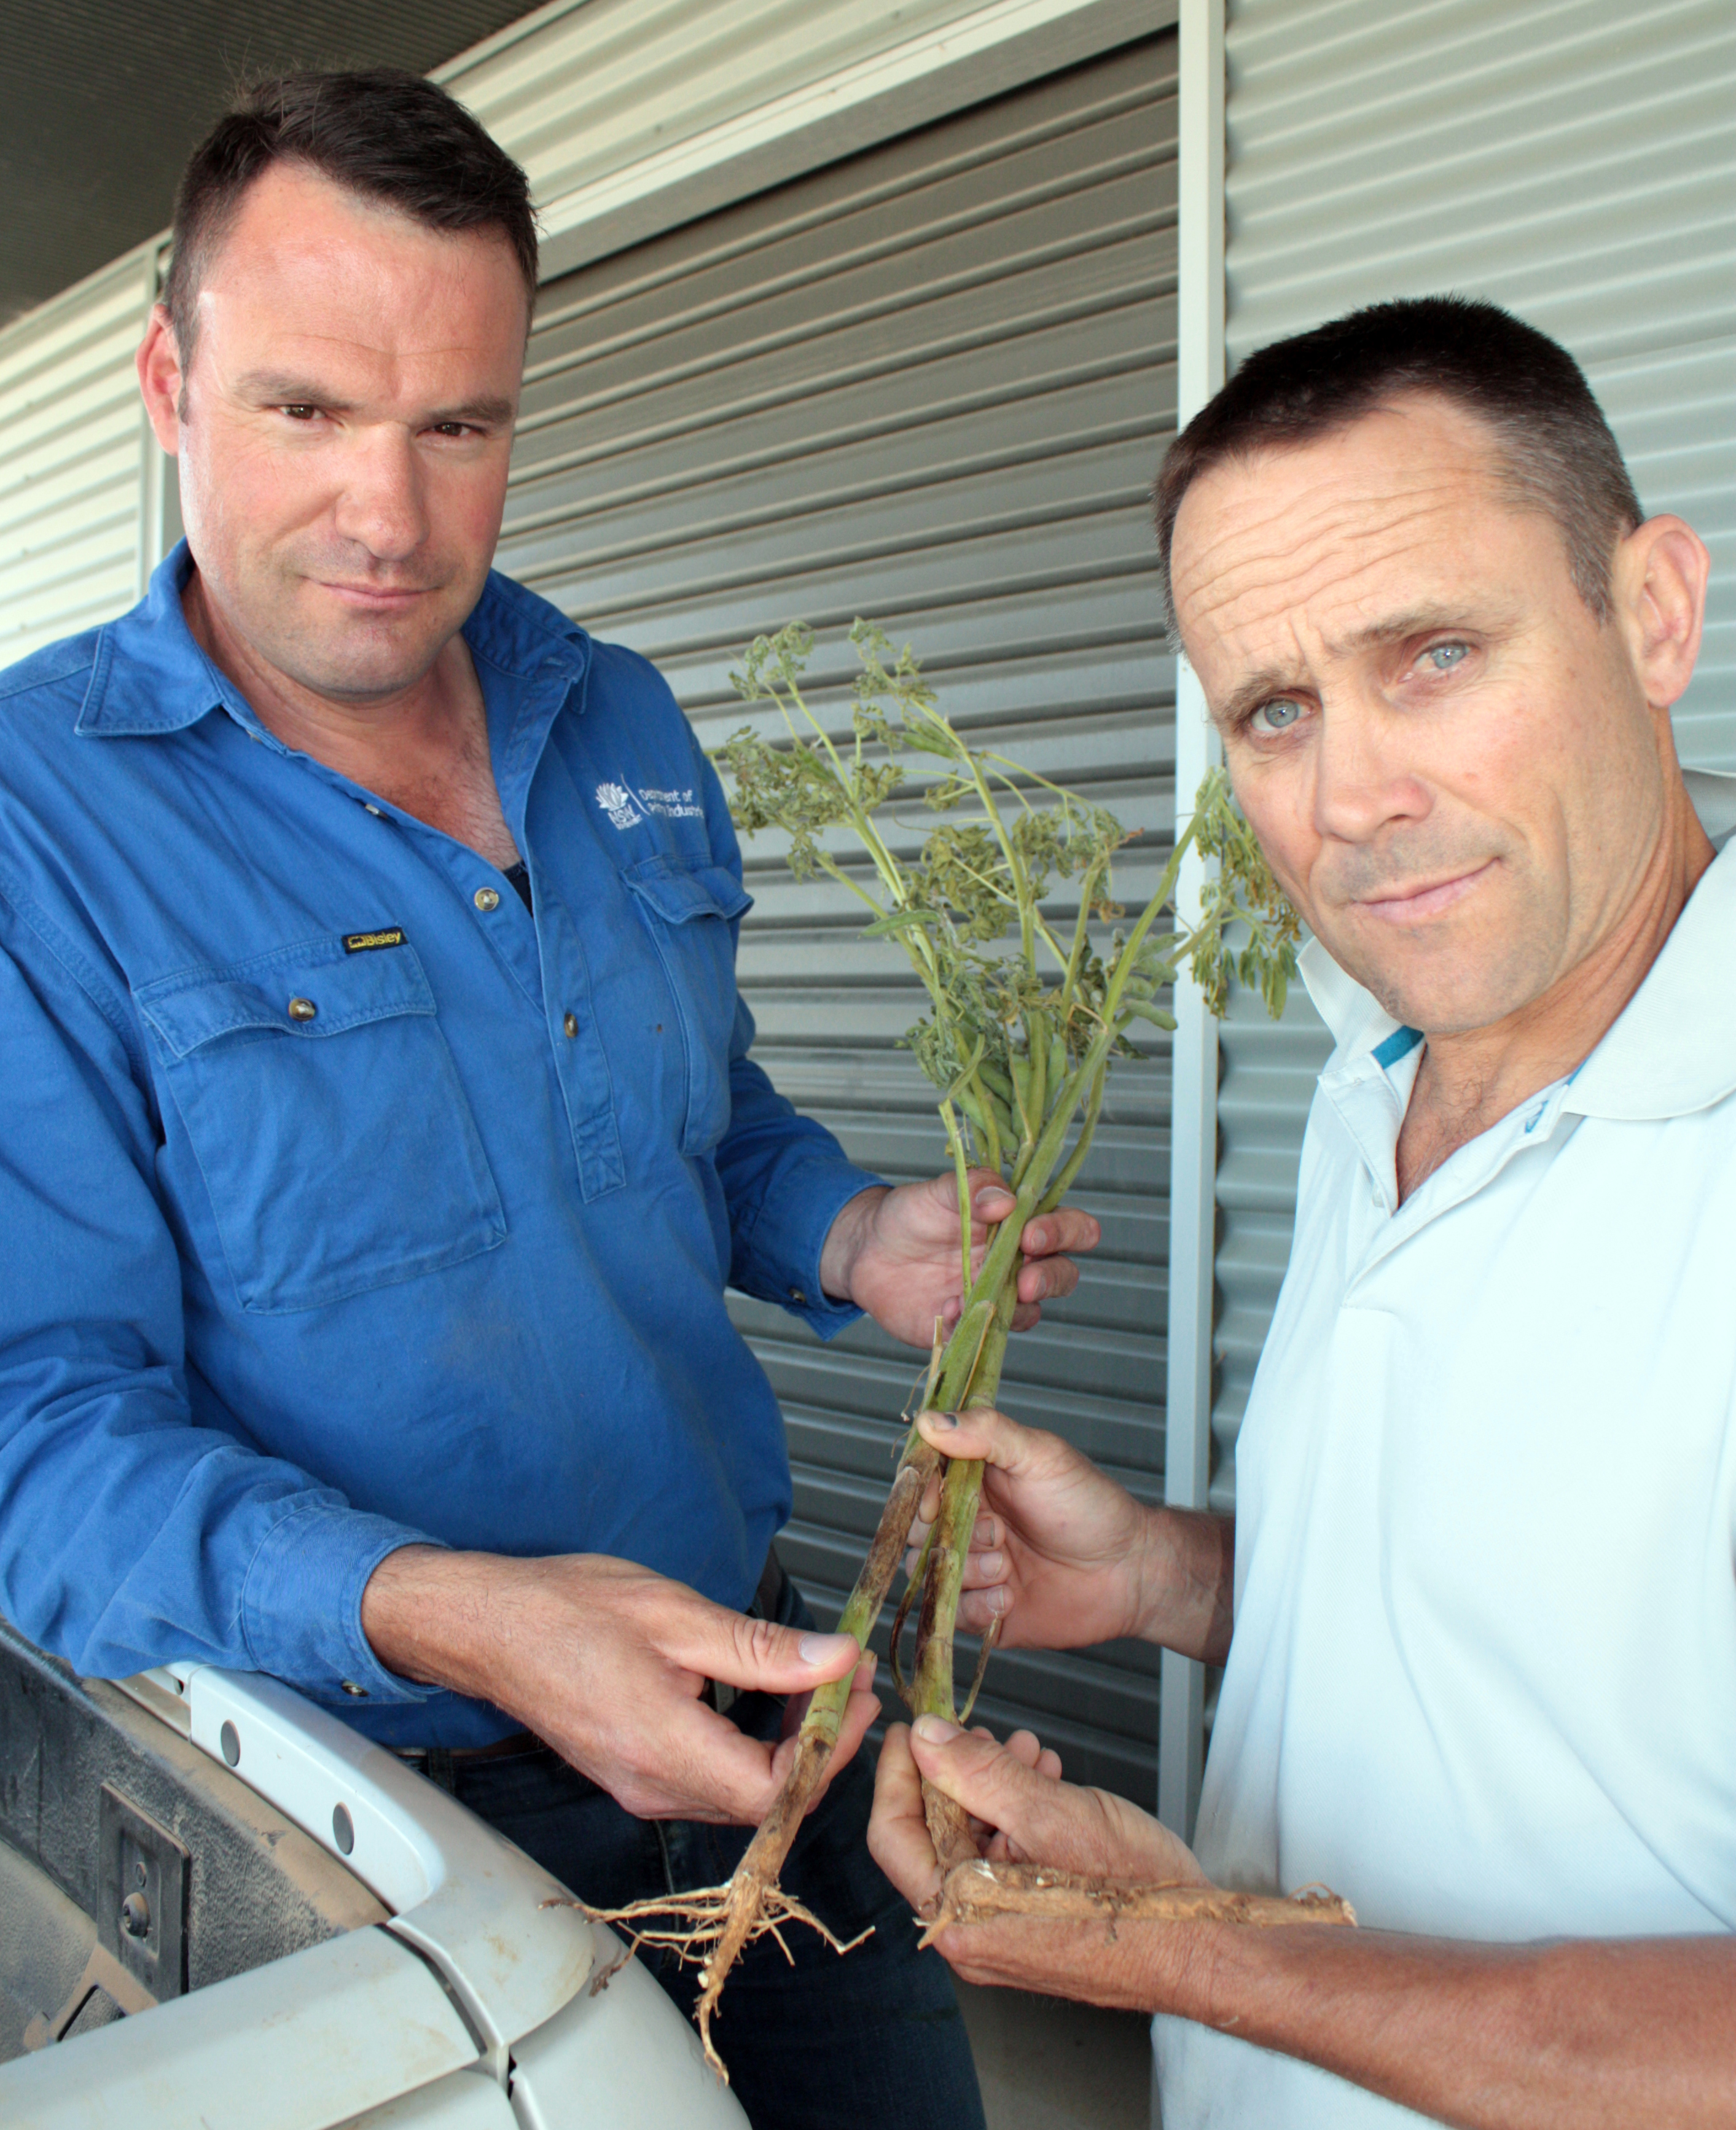 Kurt Lindbeck and Geoff Casburn holding a green lupin plant with phomopsis